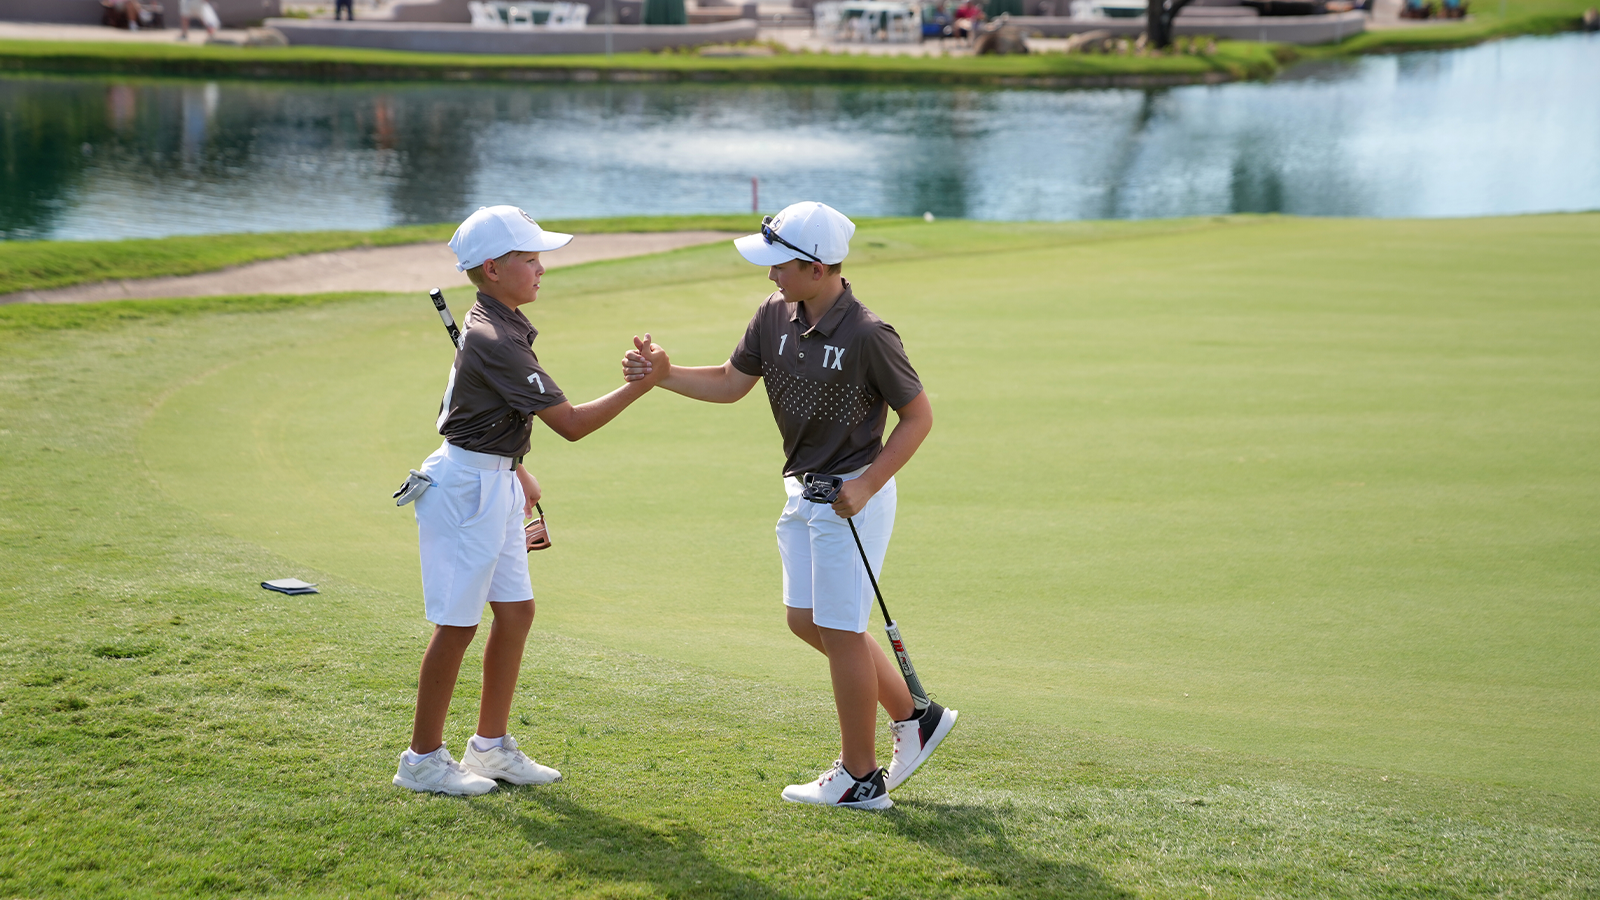 Lincoln Rubis and Brayden Verret of Team Texas celebrate during the first round of the 2022 National Car Rental PGA Jr. League Championship at Grayhawk Golf Club on October 7, 2022 in Scottsdale, Arizona. (Photo by Darren Carroll/PGA of America)